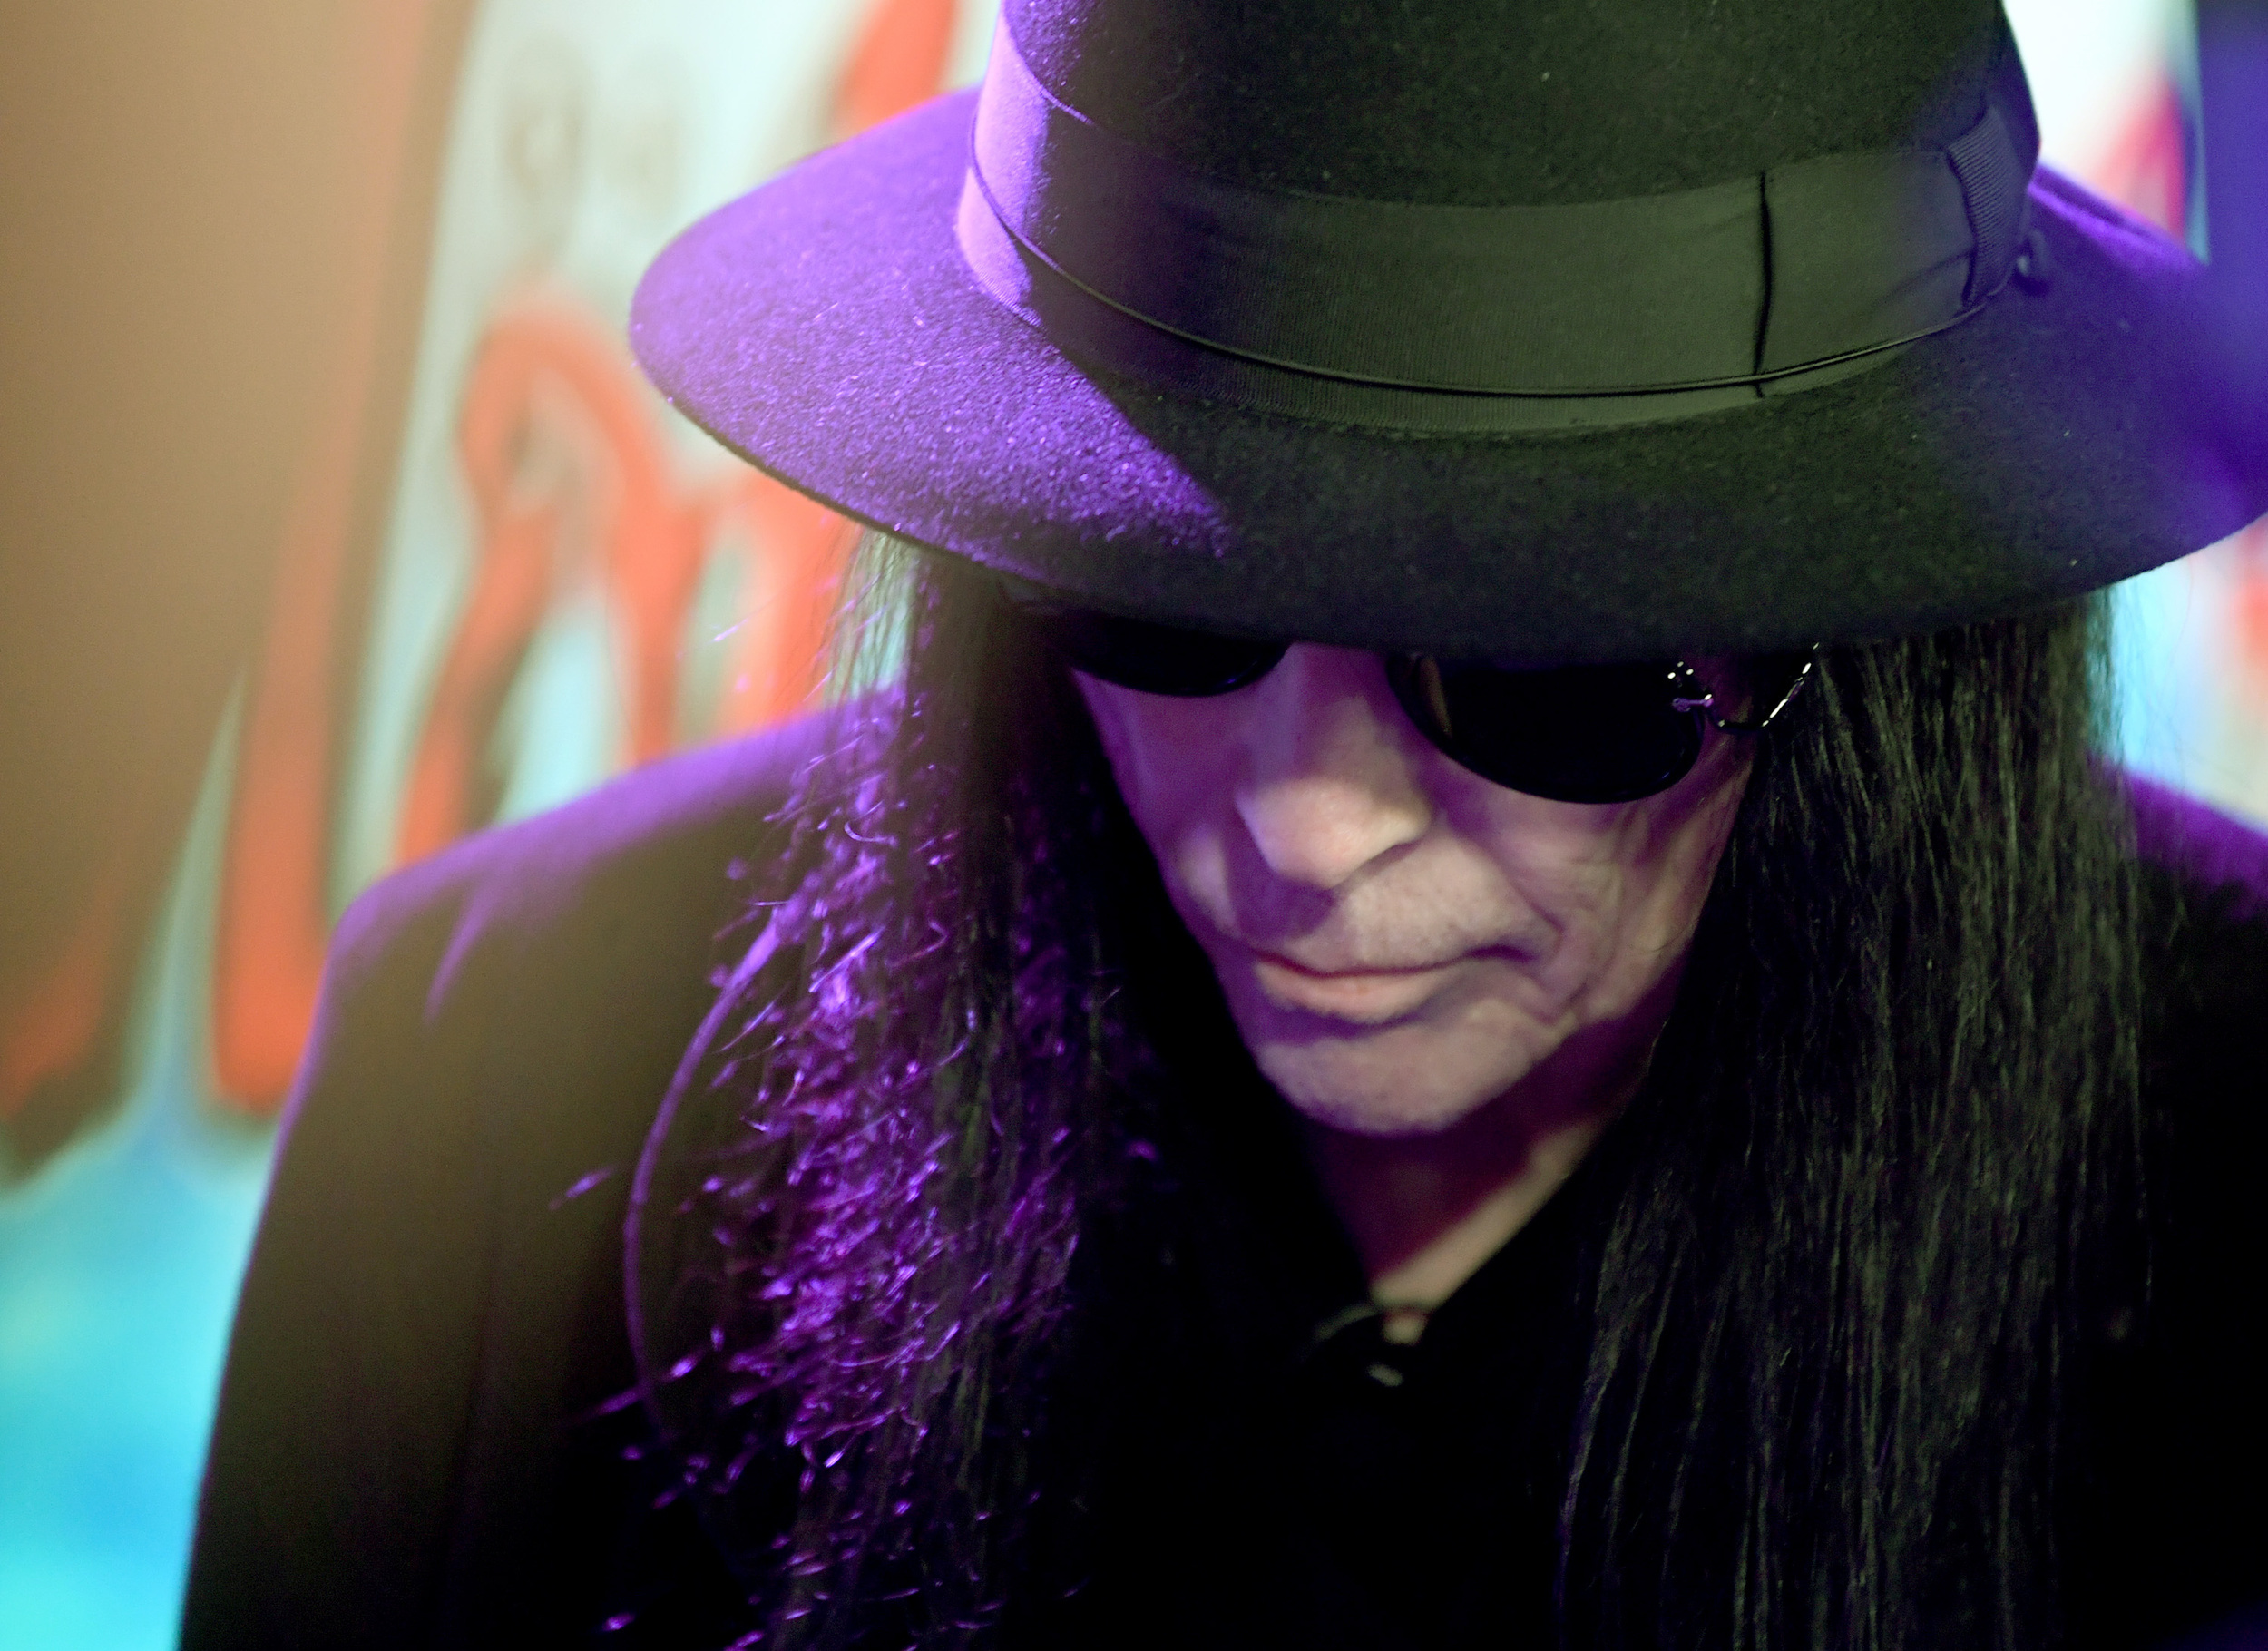 <p>Guitarist Mick Mars retired from Motley Crue in 2022, he ended his longstanding reign as the most talented member of that band. Even though he's been struggling with ankylosing spondylitis for the last 45 years (probably longer, as he didn't received a diagnosis until he was 27), he's continued working. <em>The Other Side of Mars</em> shows off his new band featuring drummer Ray Luzier (Korn), bassist Paul Taylor (Alice Cooper), and Emmy Award winning (!) singer Jacob Bunton (he's also a composer and multi-instrumentalist. It will be interesting to see what his riffs sound like without a certain former bandmate bleating like a calf over it all.</p><p><a href='https://www.msn.com/en-us/community/channel/vid-cj9pqbr0vn9in2b6ddcd8sfgpfq6x6utp44fssrv6mc2gtybw0us'>Follow us on MSN to see more of our exclusive entertainment content.</a></p>